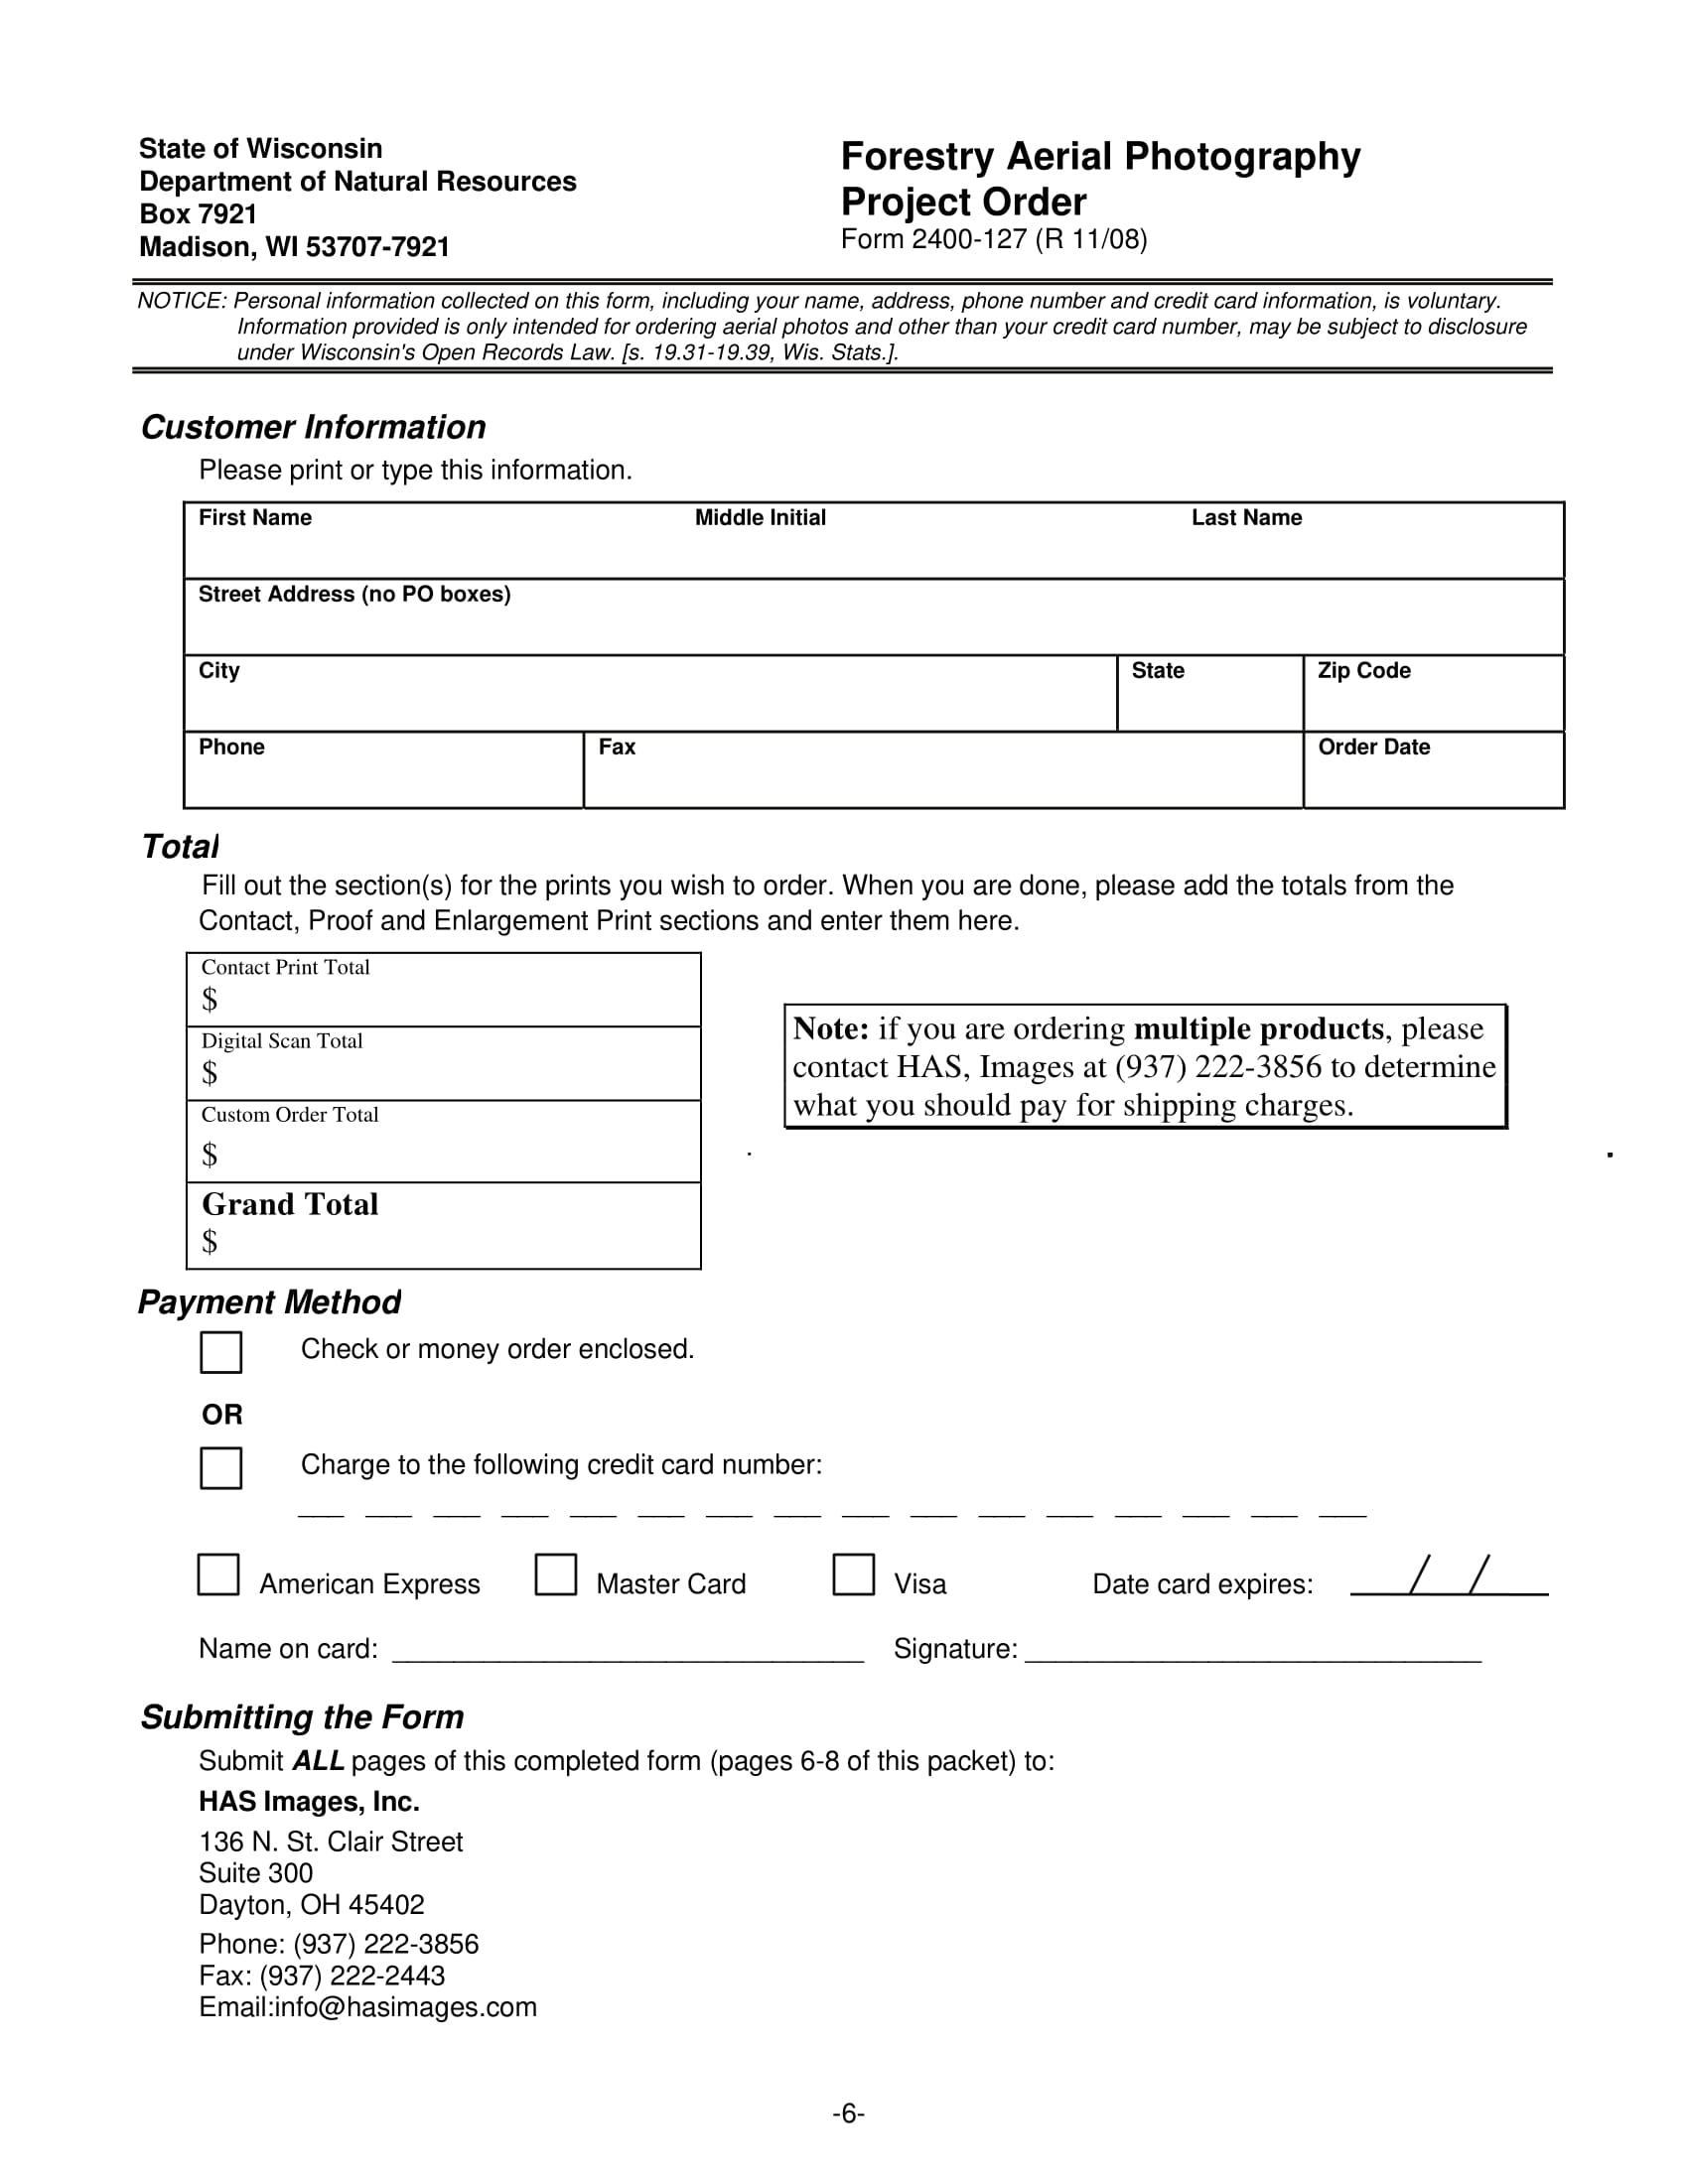 forestry aerial photography project order form 08